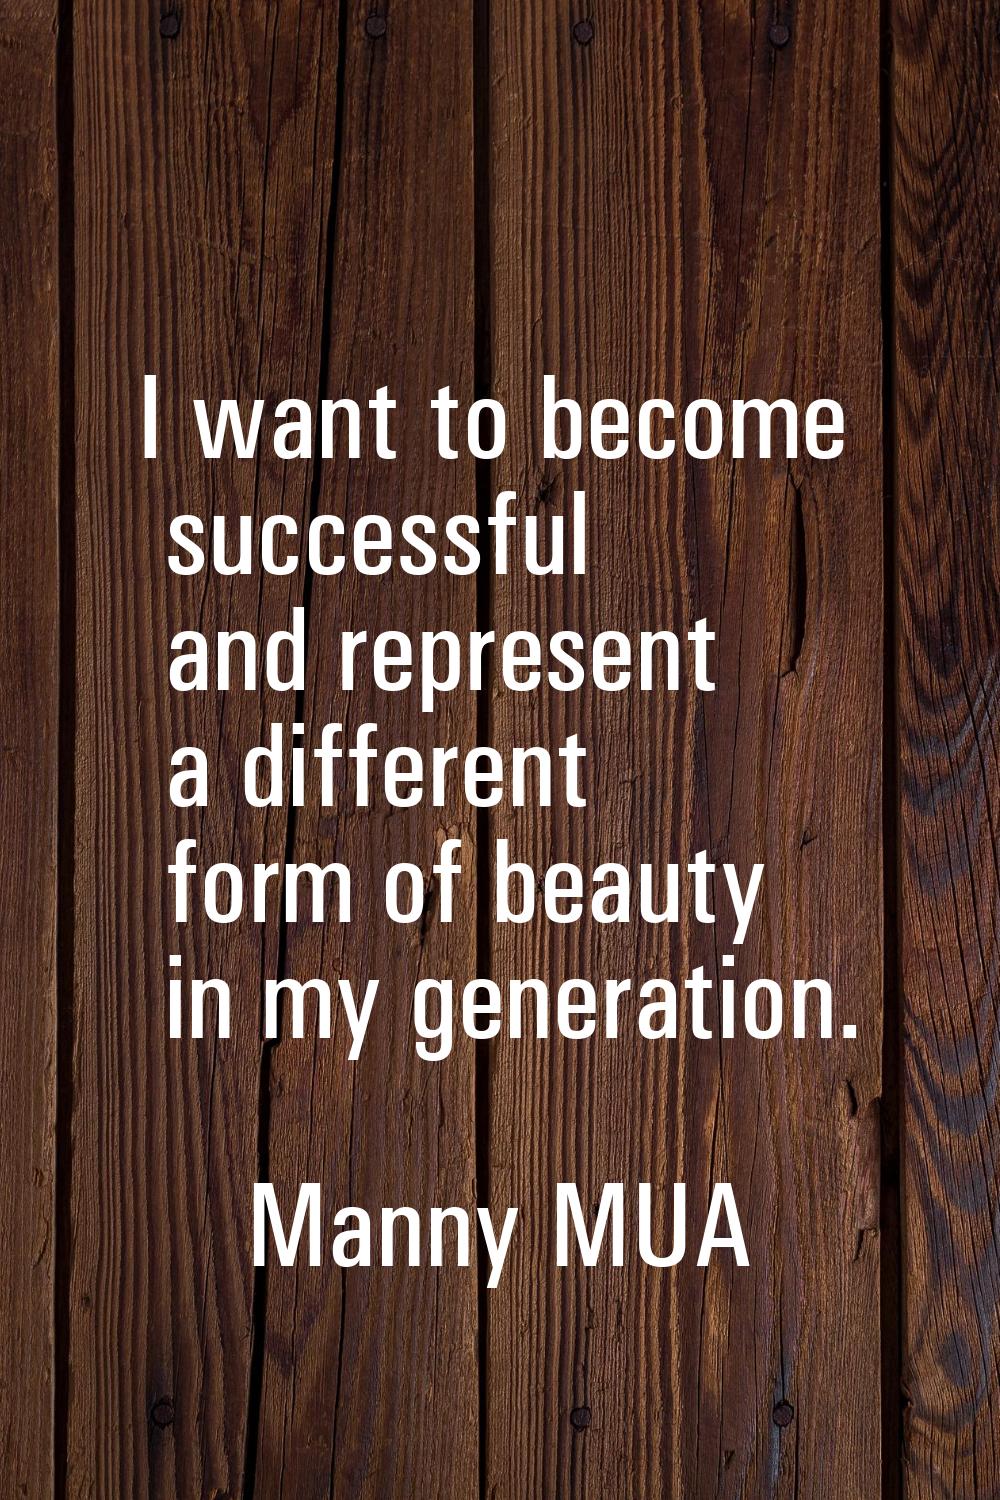 I want to become successful and represent a different form of beauty in my generation.